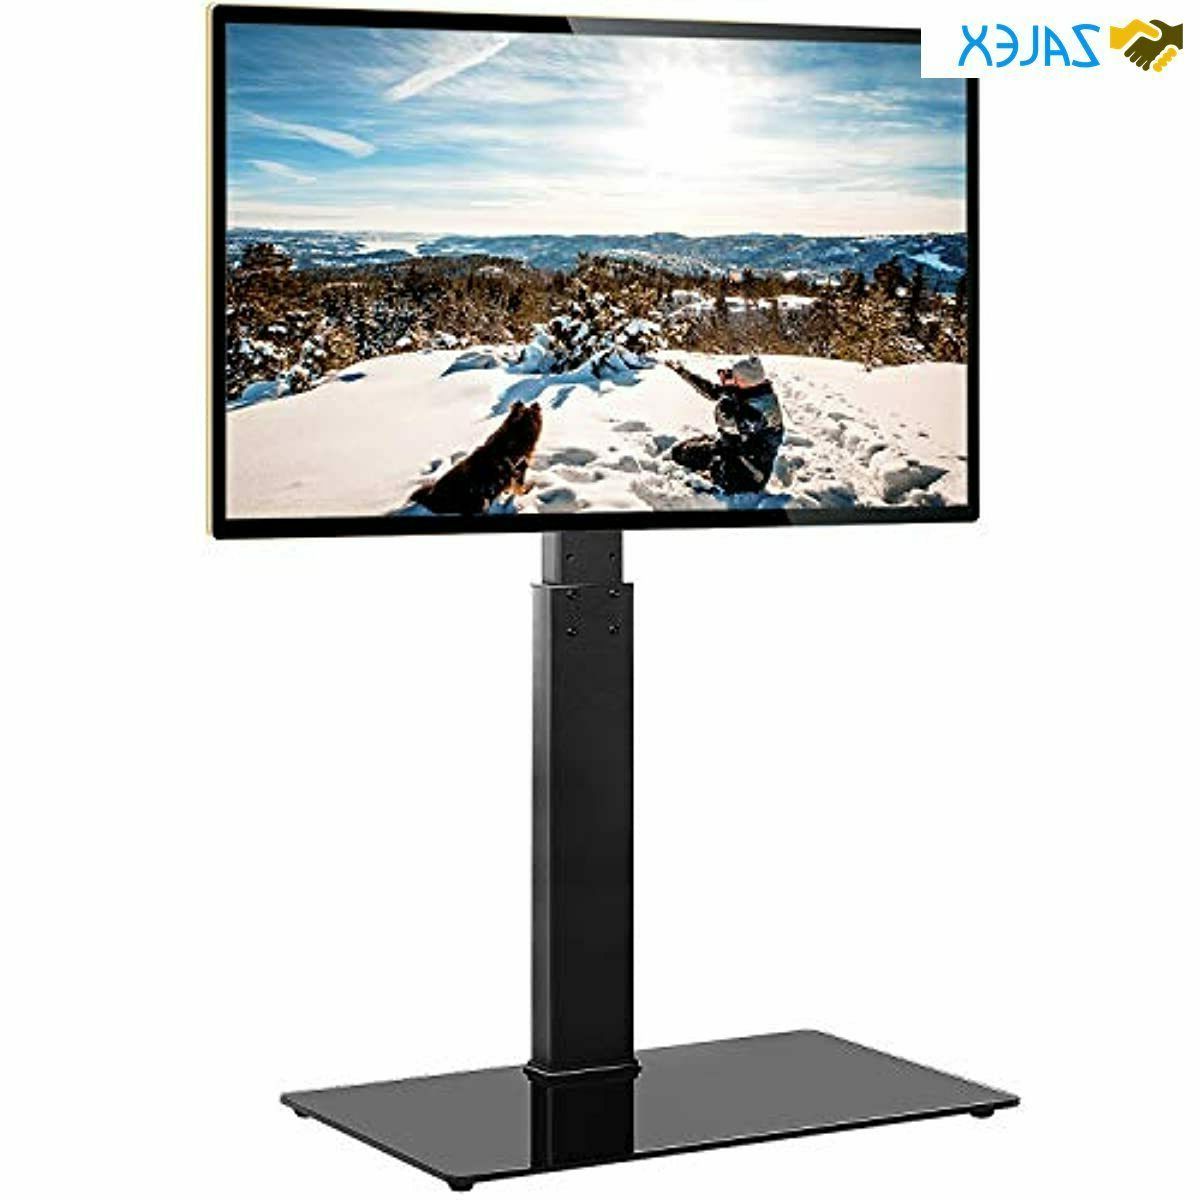 Trendy Tavr Universal Floor Tv Stand Base With Swivel Height Regarding Floor Tv Stands With Swivel Mount And Tempered Glass Shelves For Storage (Photo 1 of 10)